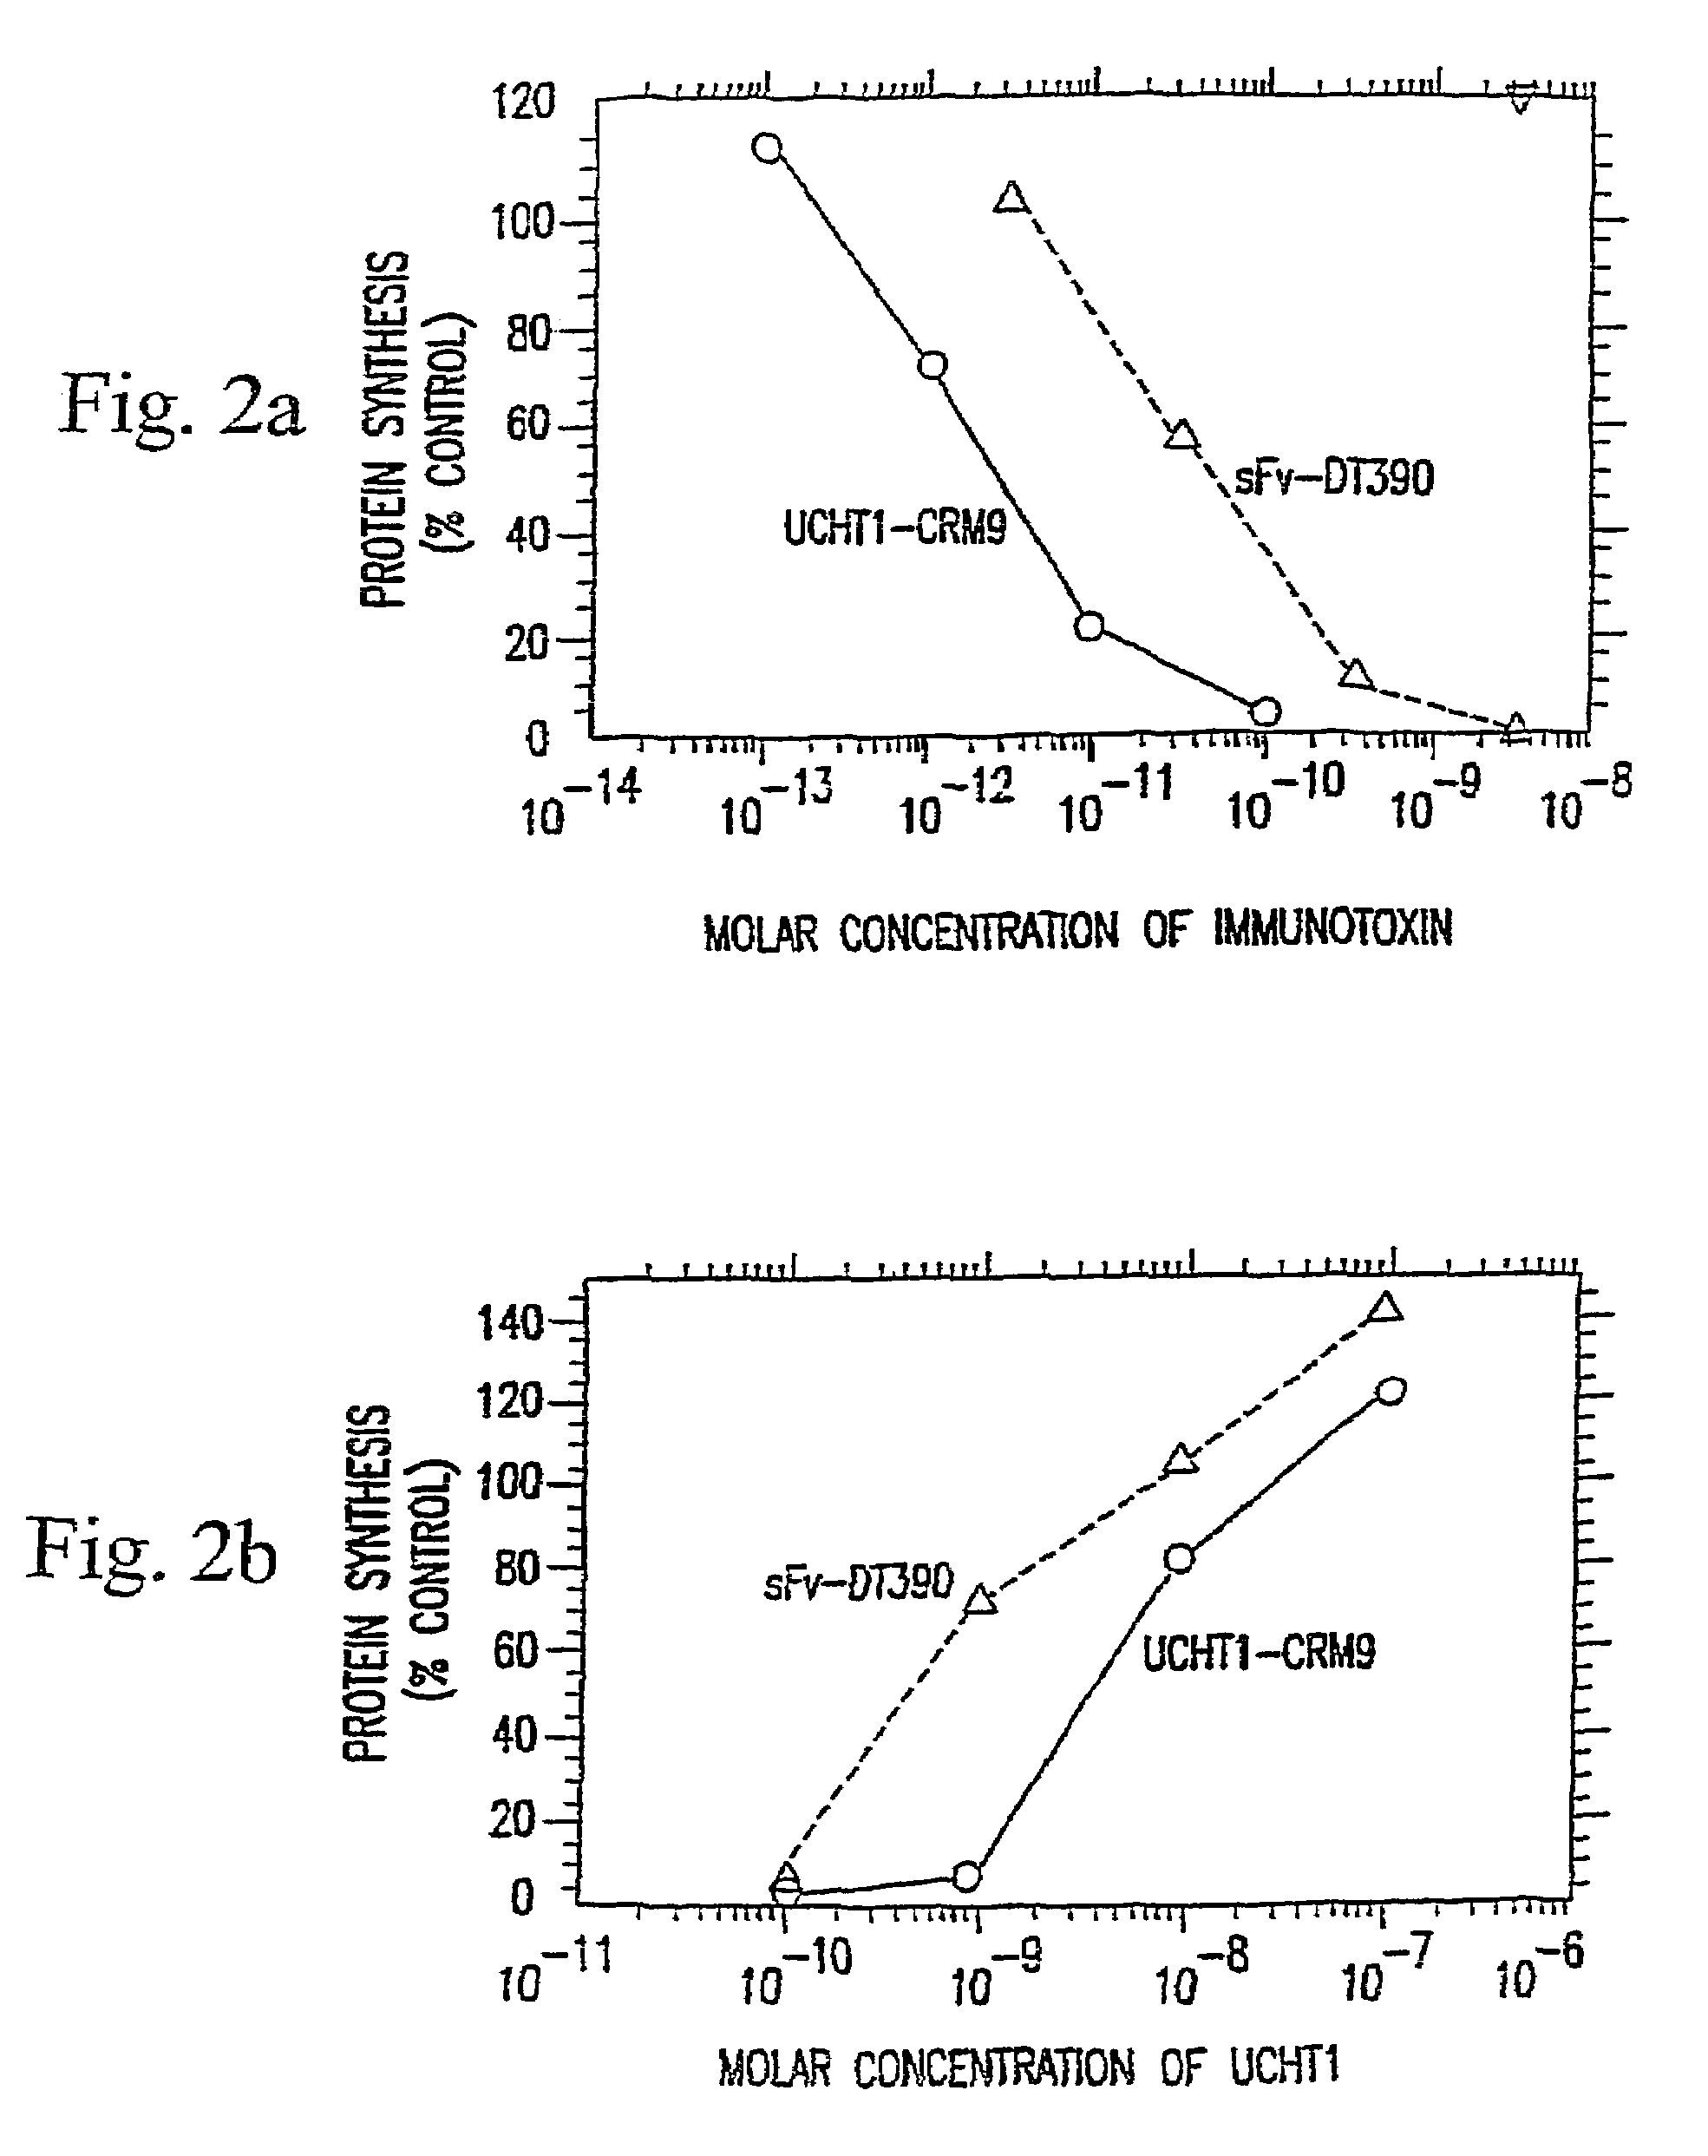 Immunotoxin fusion proteins and means for expression thereof